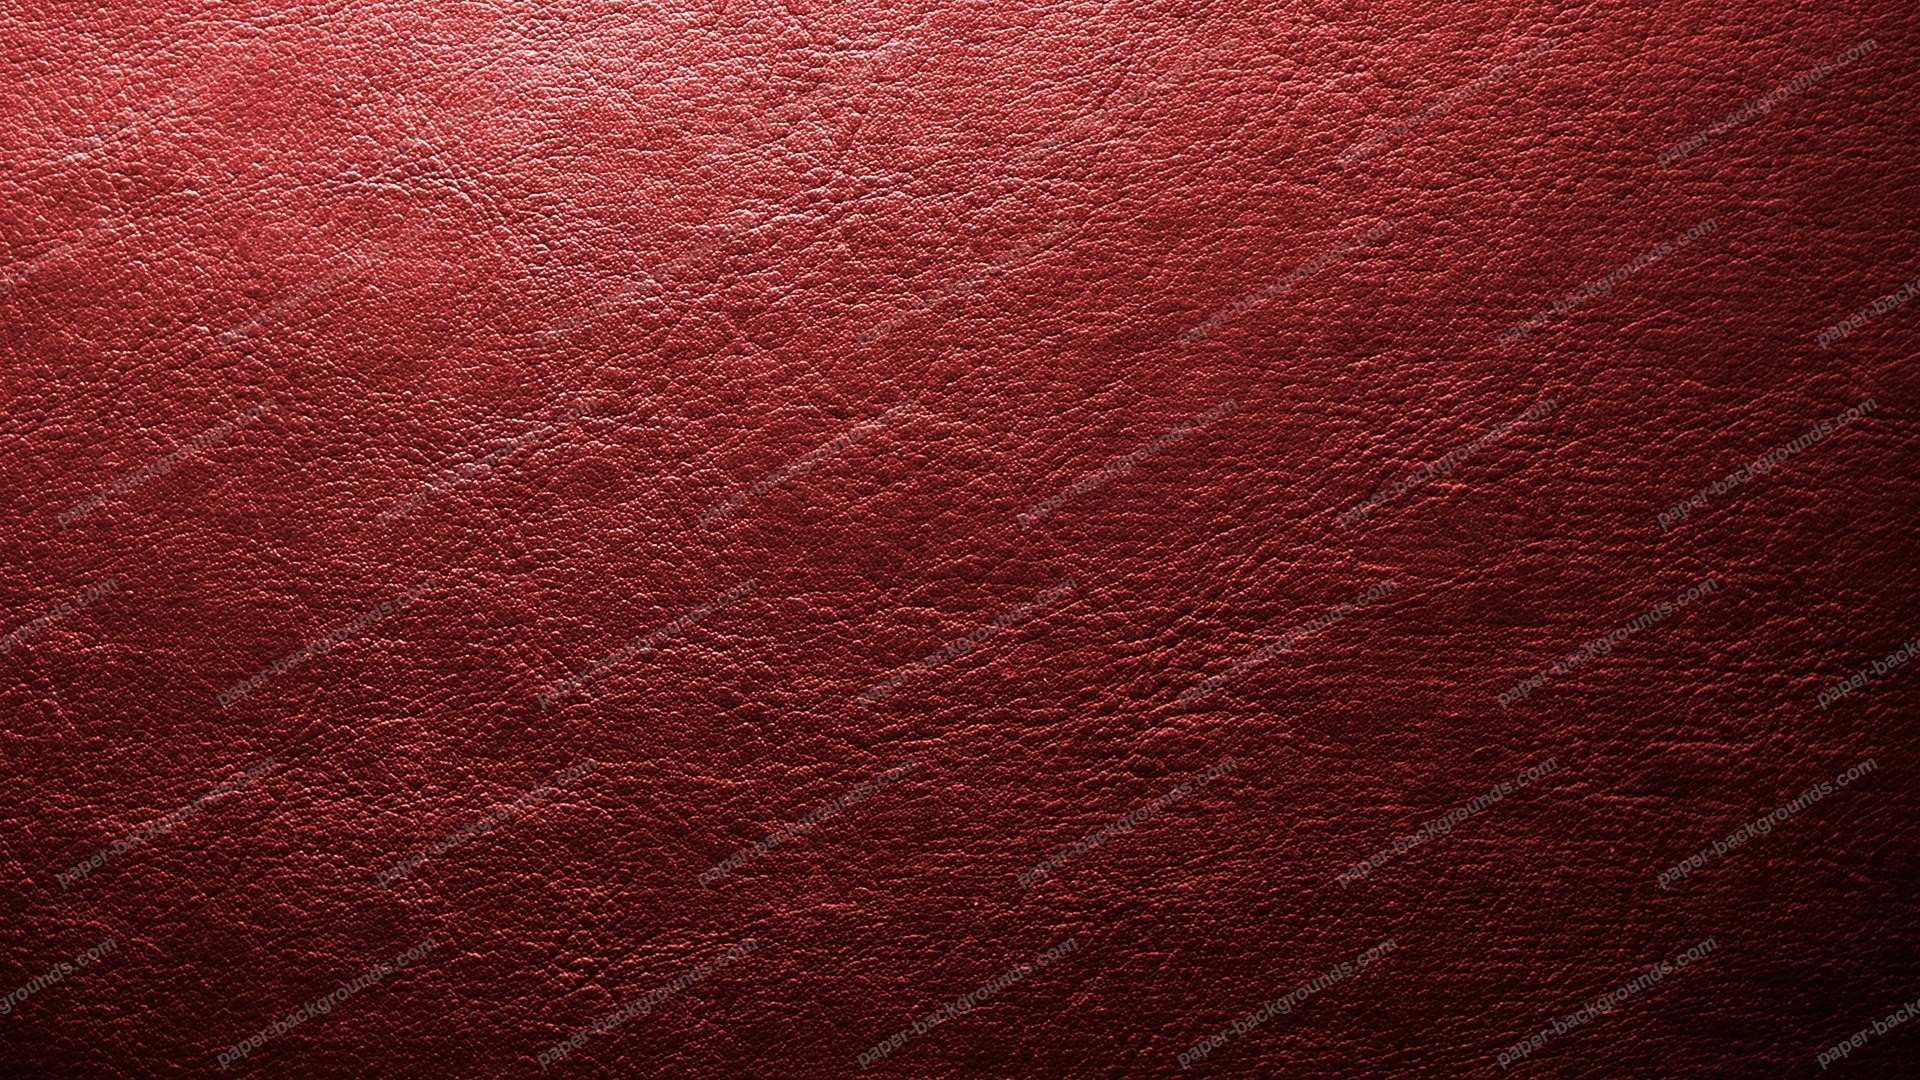 Red Leather Wallpaper 55 Images HD Wallpapers Download Free Images Wallpaper [wallpaper981.blogspot.com]